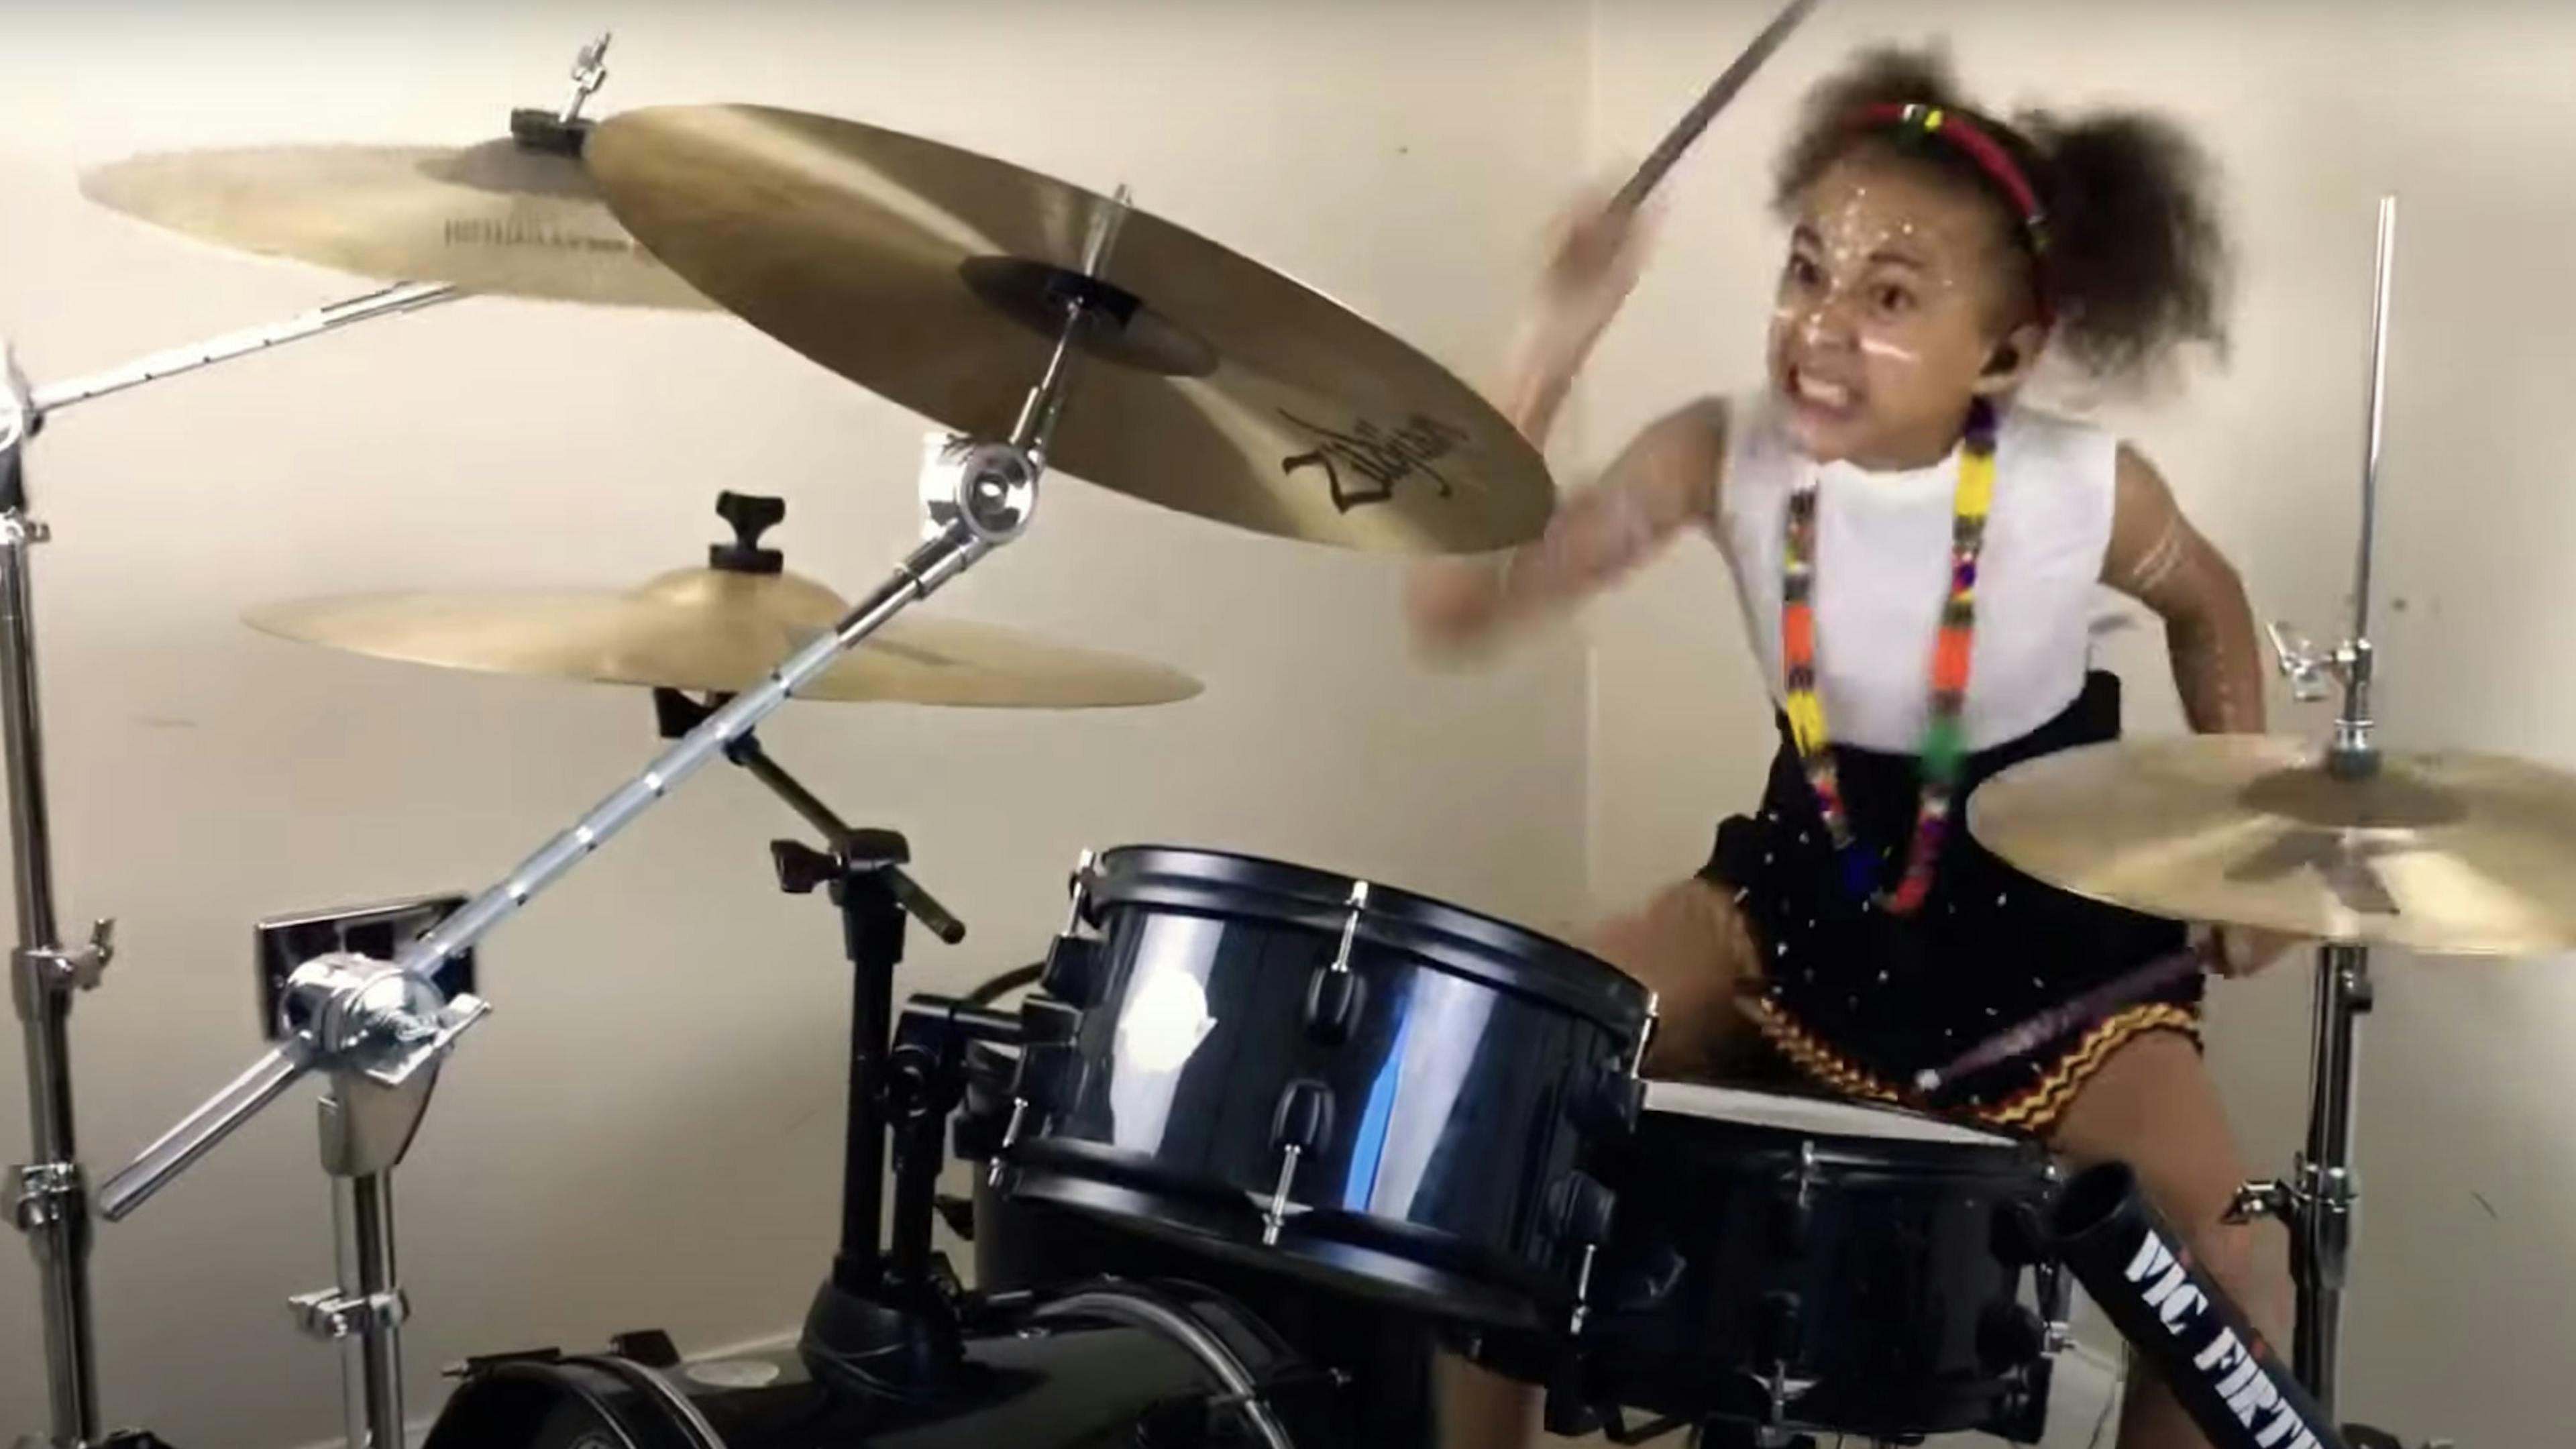 Watch This 10-Year-Old Crush Royal Blood's Out Of The Black On Drums